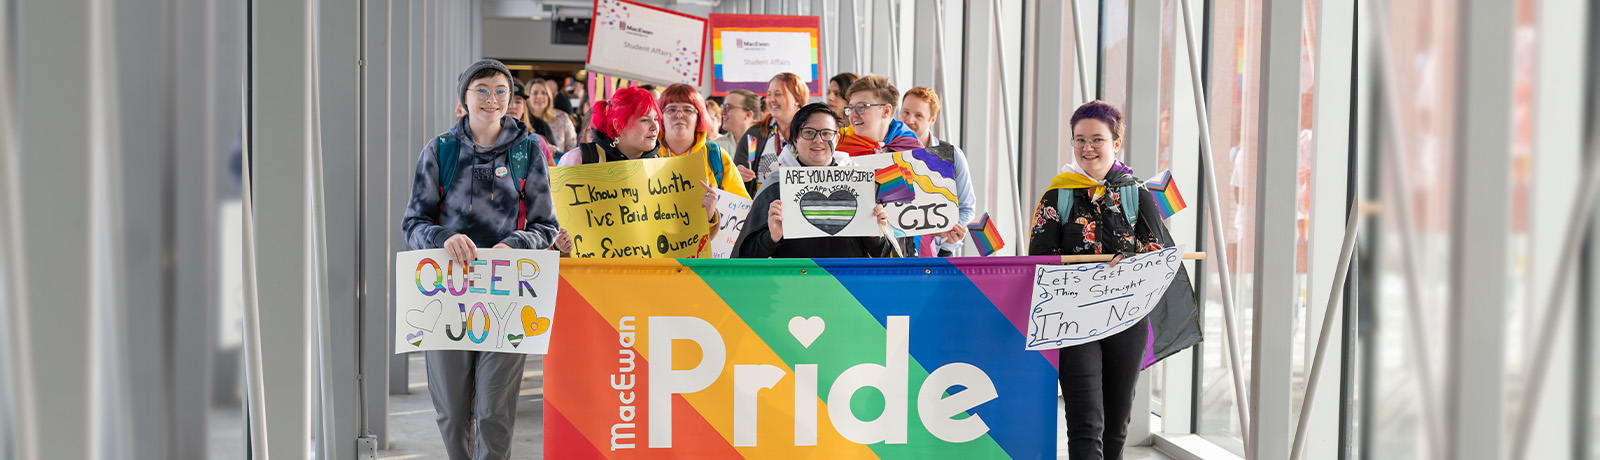 A group of students walking along a pedway holding a large banner that reads MacEwan Pride, along with other smaller signs